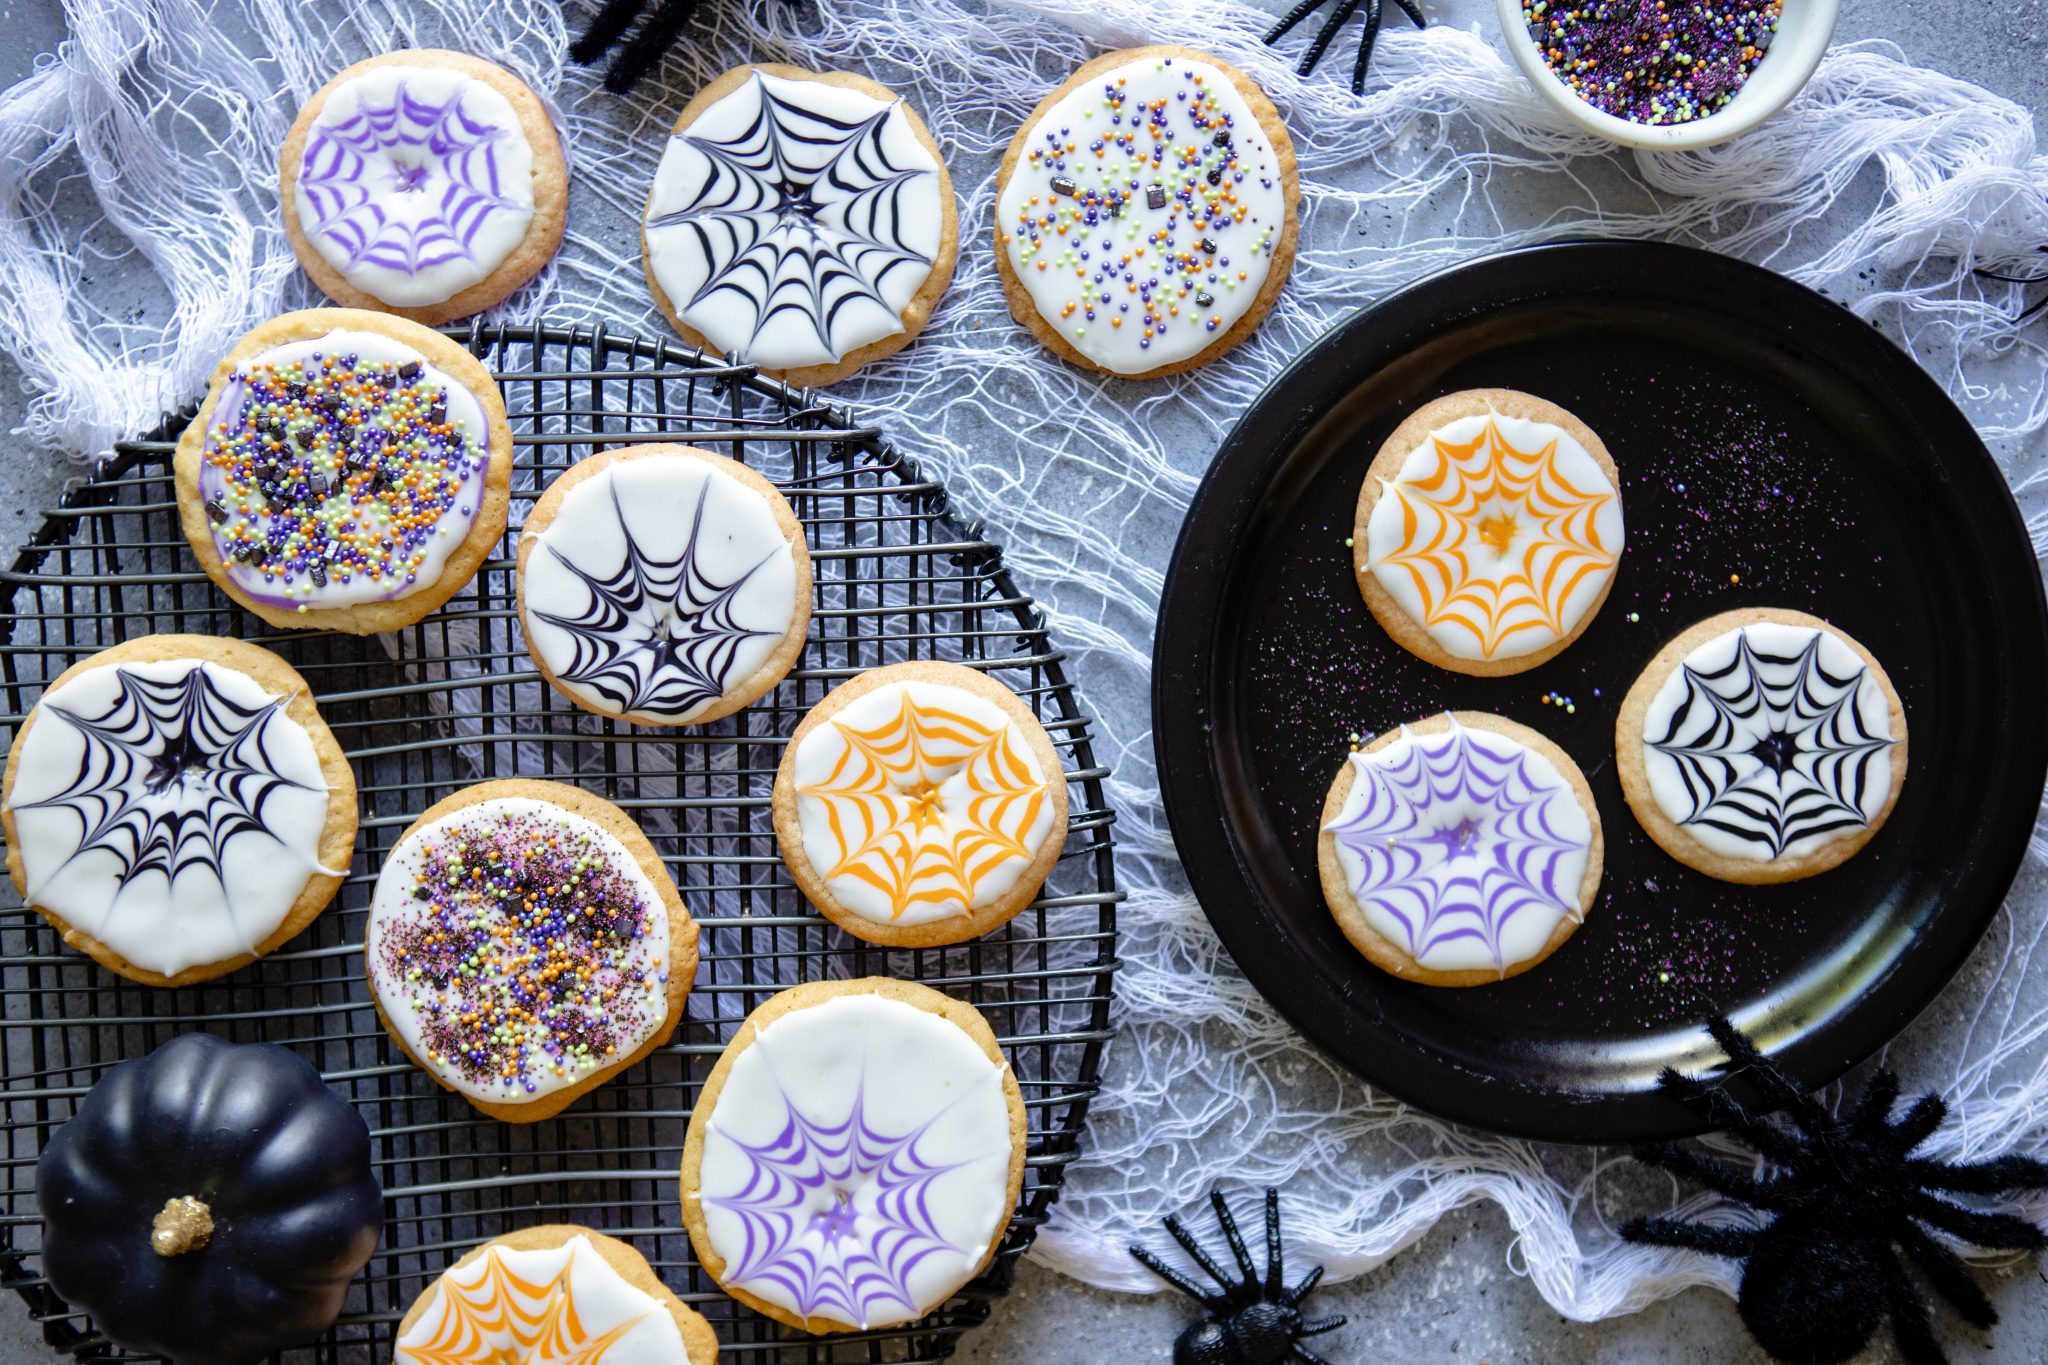 Halloween cookie ideas on a white cloth against a gray background